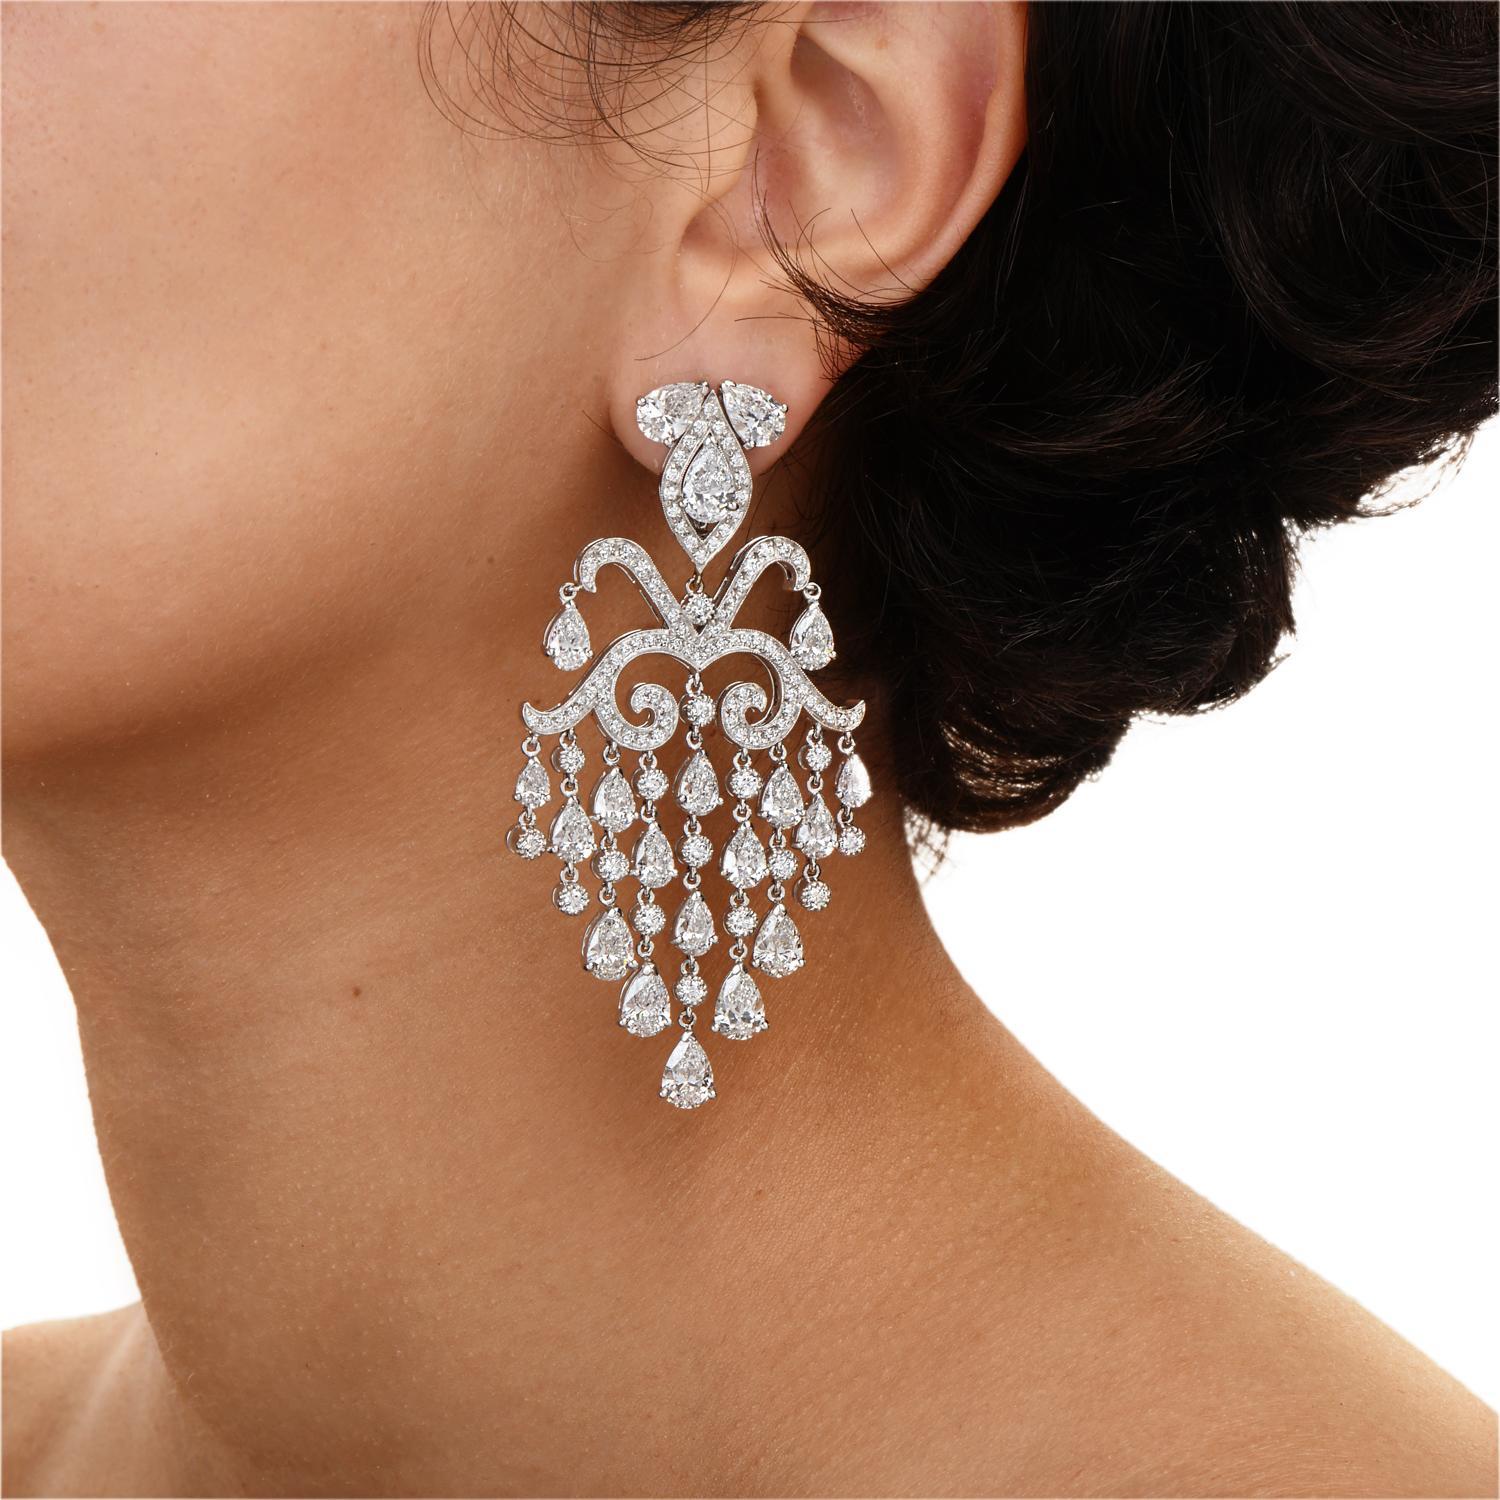 The Ultimate Royalty Look!

Stand out in the crowd with this impressive chandelier 18k white gold earrings, from the Jewelry Designer Orianne Collins.

Presenting a cascading of sparkly graduated Pea-shape natural Diamonds from approx. 1.35 carats